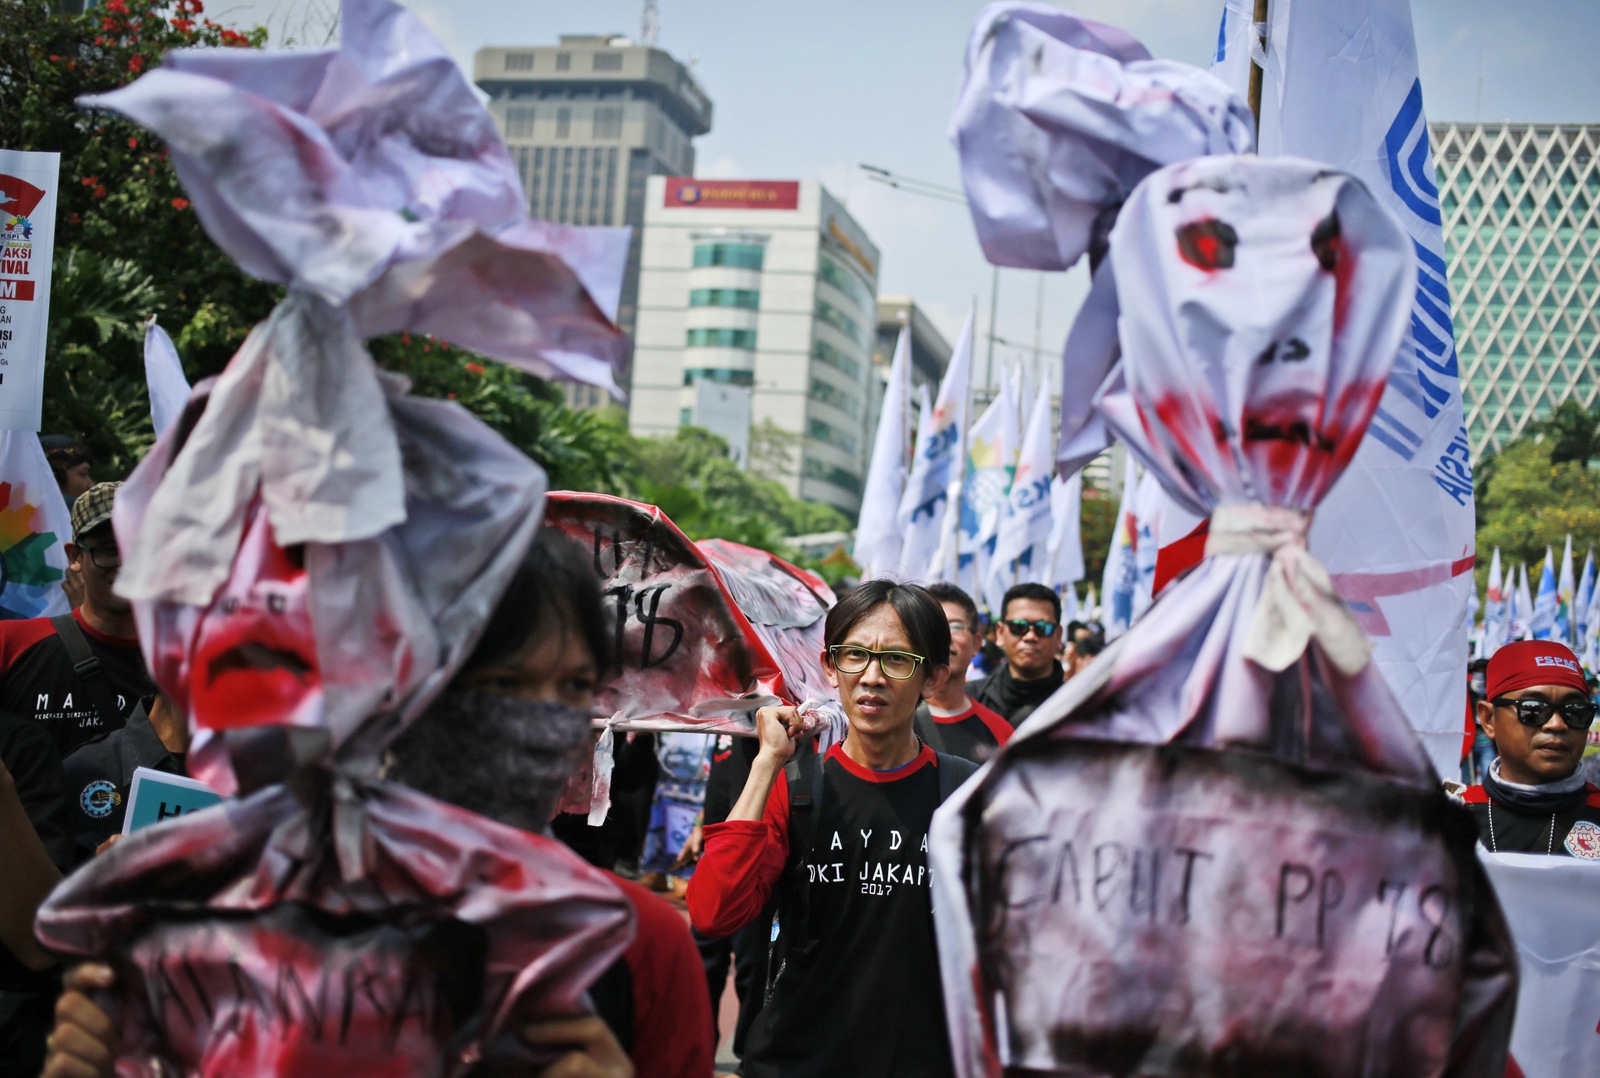 Workers carry a mock coffin and effigies during a May Day rally in Jakarta, Indonesia, Monday, May 1, 2017. Thousands of workers attended the rally urging the government to raise minimum wages, ban outsourcing practices, provide free health care and improve working condition for workers in the country. 